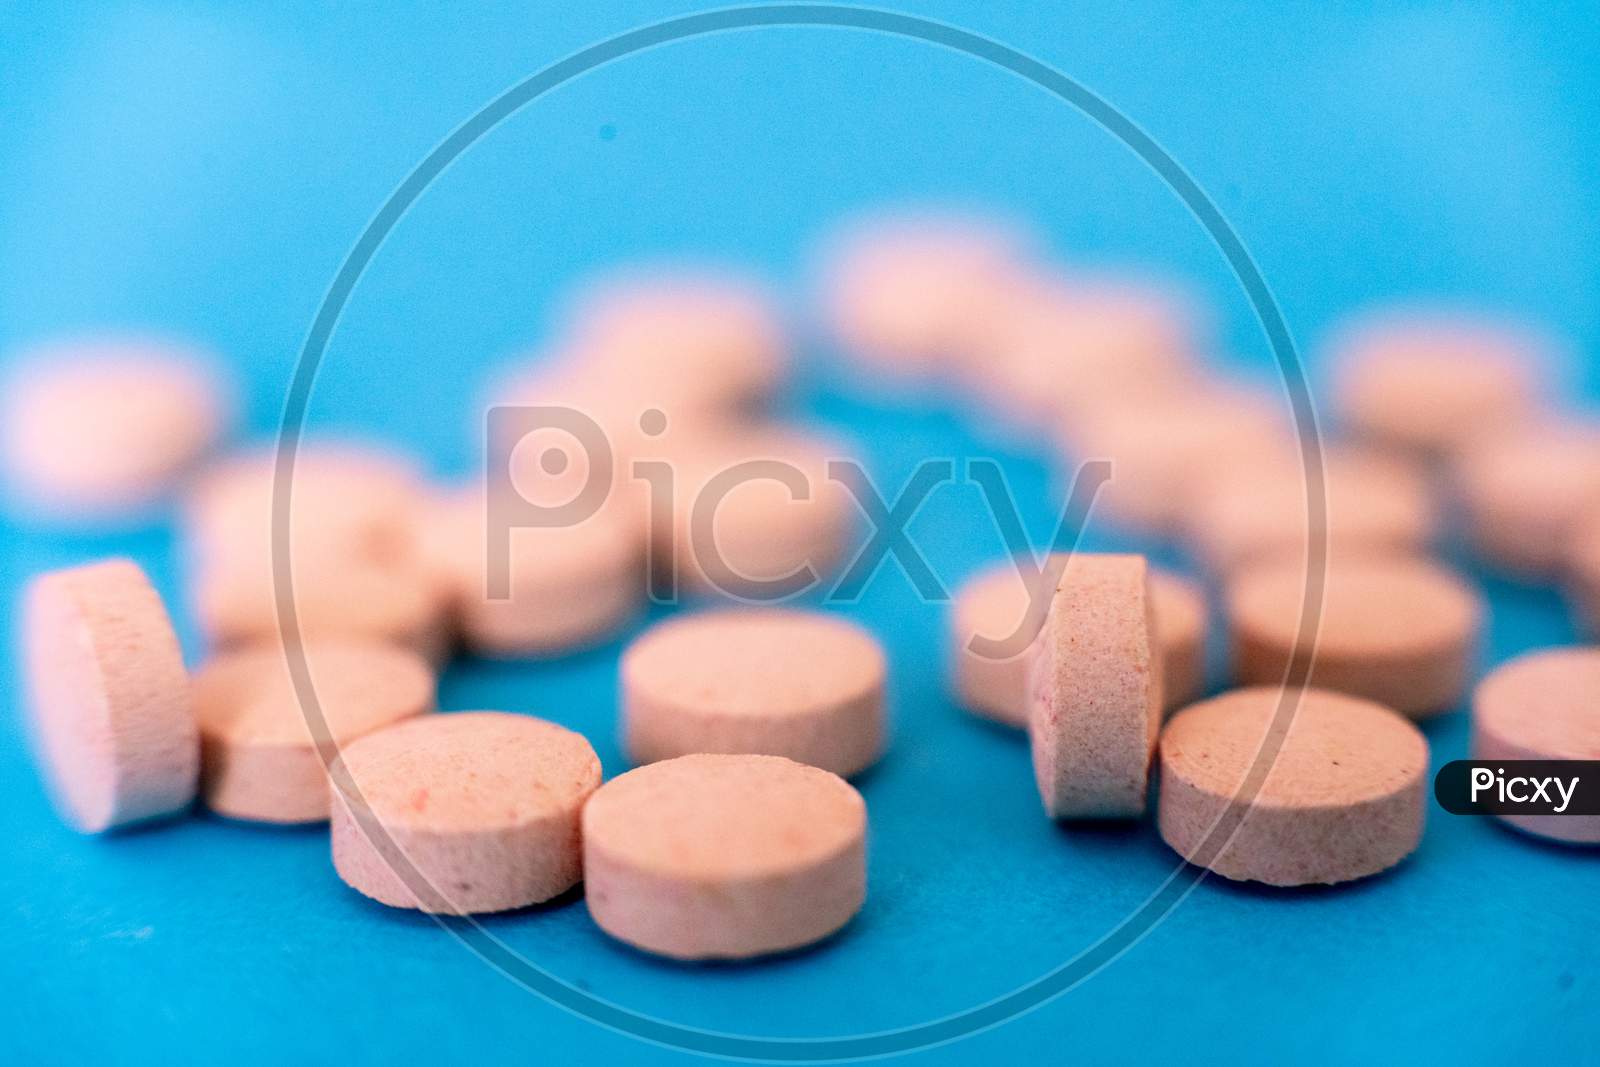 Selective Focus Shot Showing Tablets, On Blue Showing The Antiviral Cure For Coronavirus Covid19 Pandemic Ravaging The World